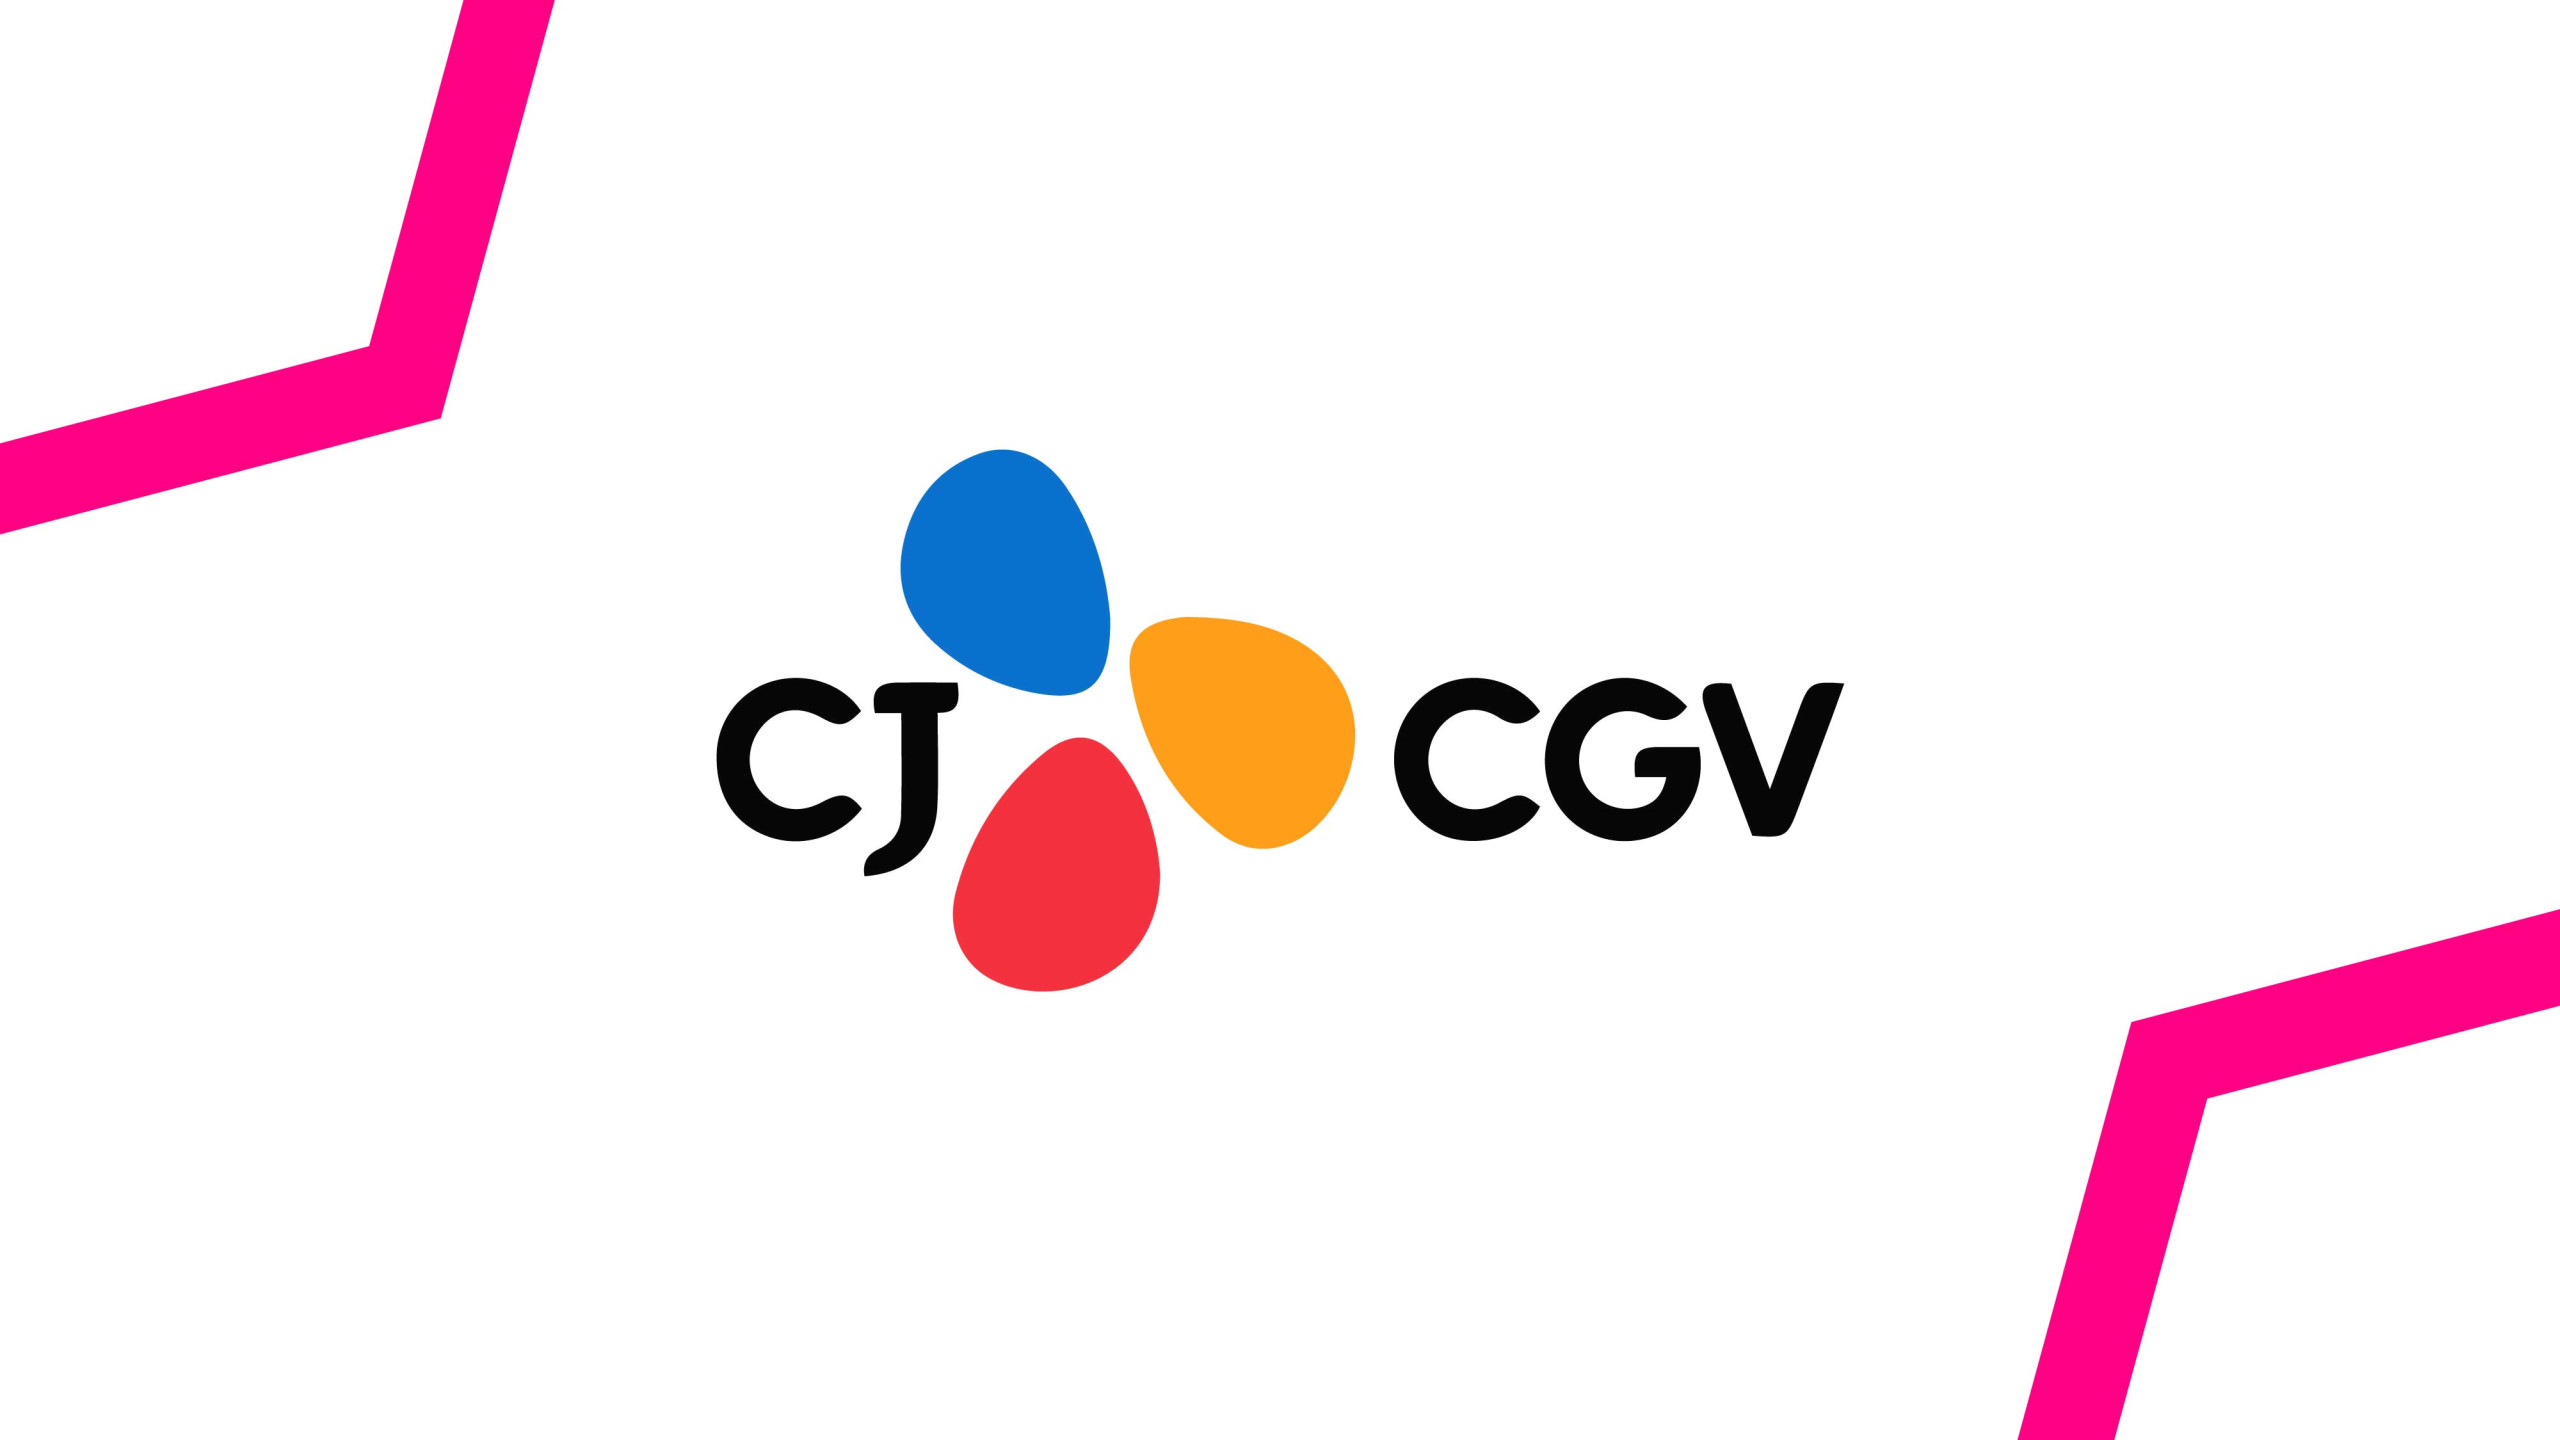 Partnership enables CJ CGV’s premium digital out of home (DOOH) inventory to be bought programmatically via the Hivestack Supply Side Platform (SSP)